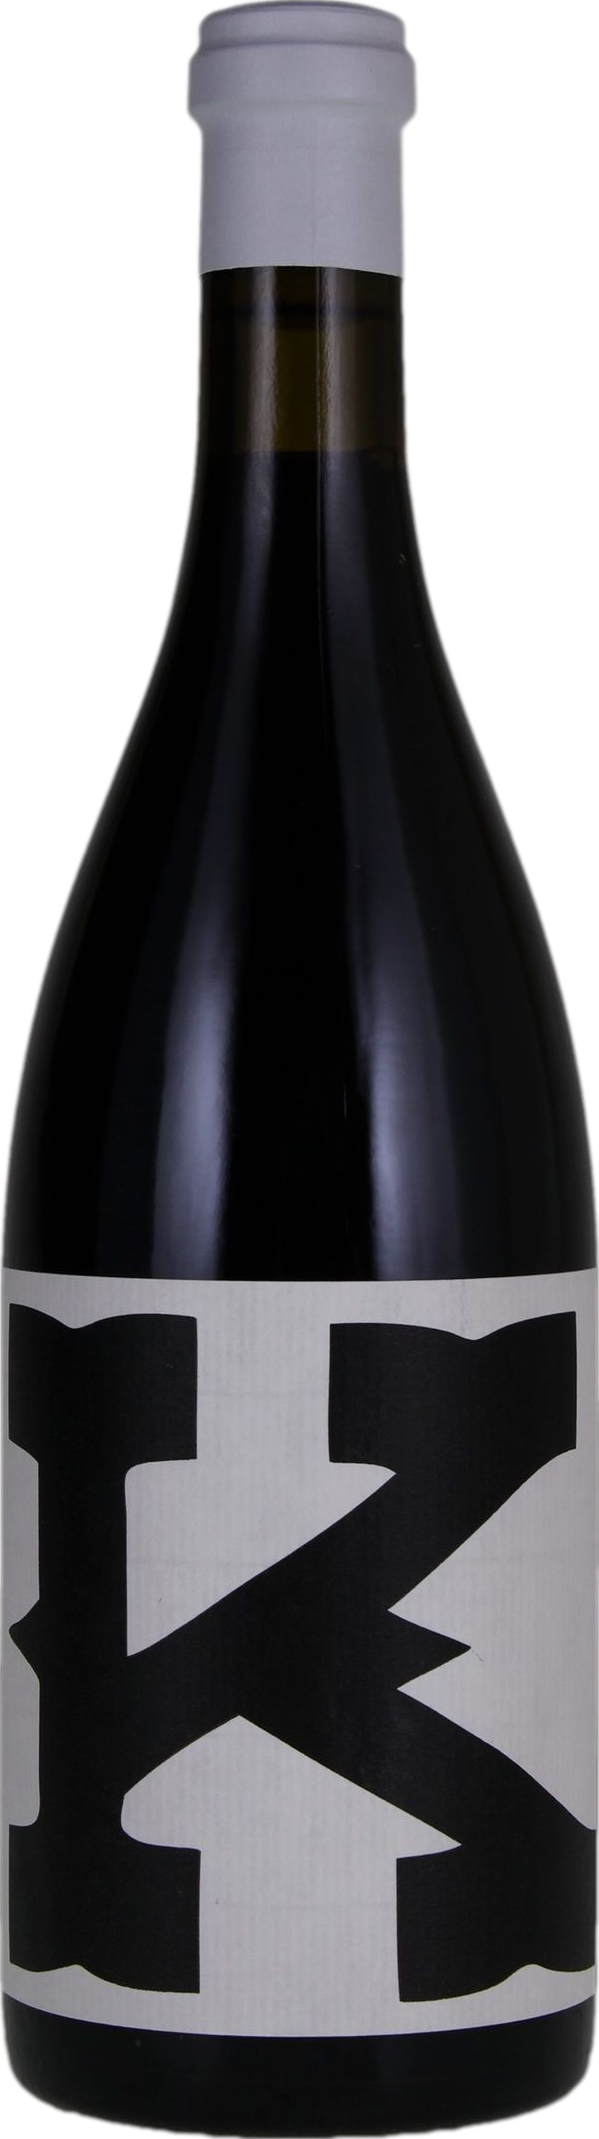 Charles Smith K Vintners The Cattle King Syrah 2020 Charles Smith 8wines DACH